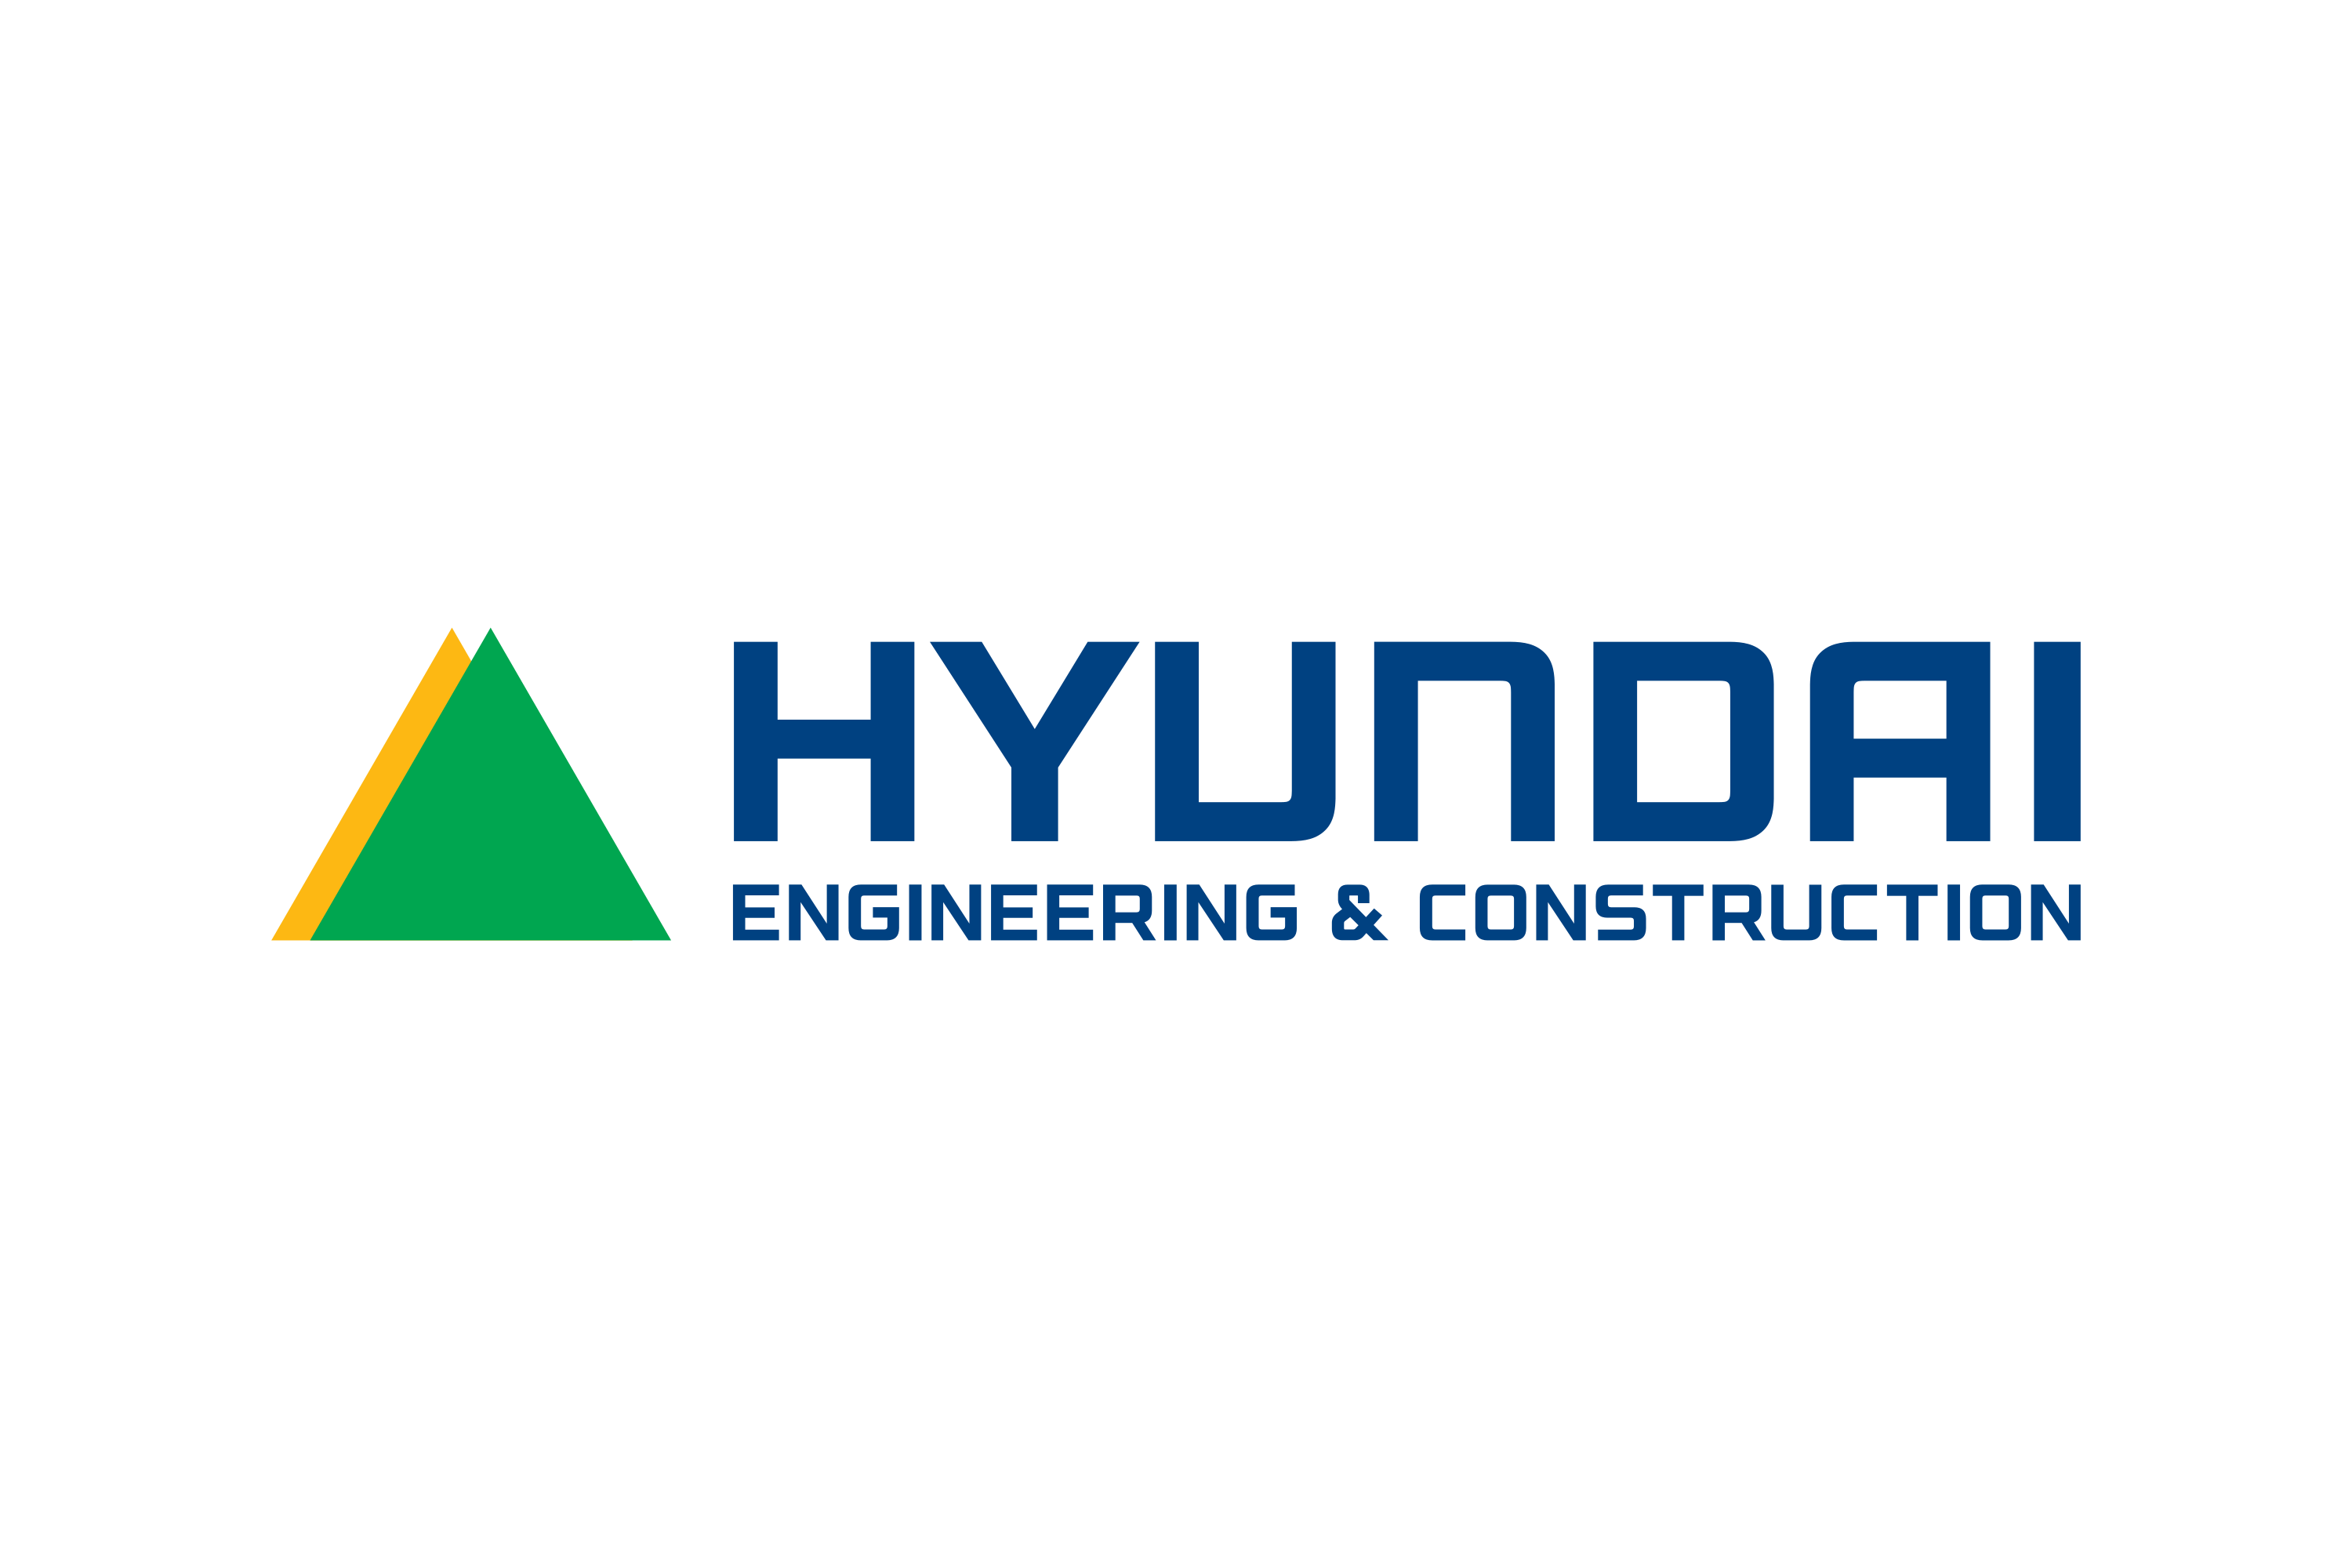 Download Hyundai Engineering and Construction Logo in SVG Vector or PNG File Format - Logo.wine